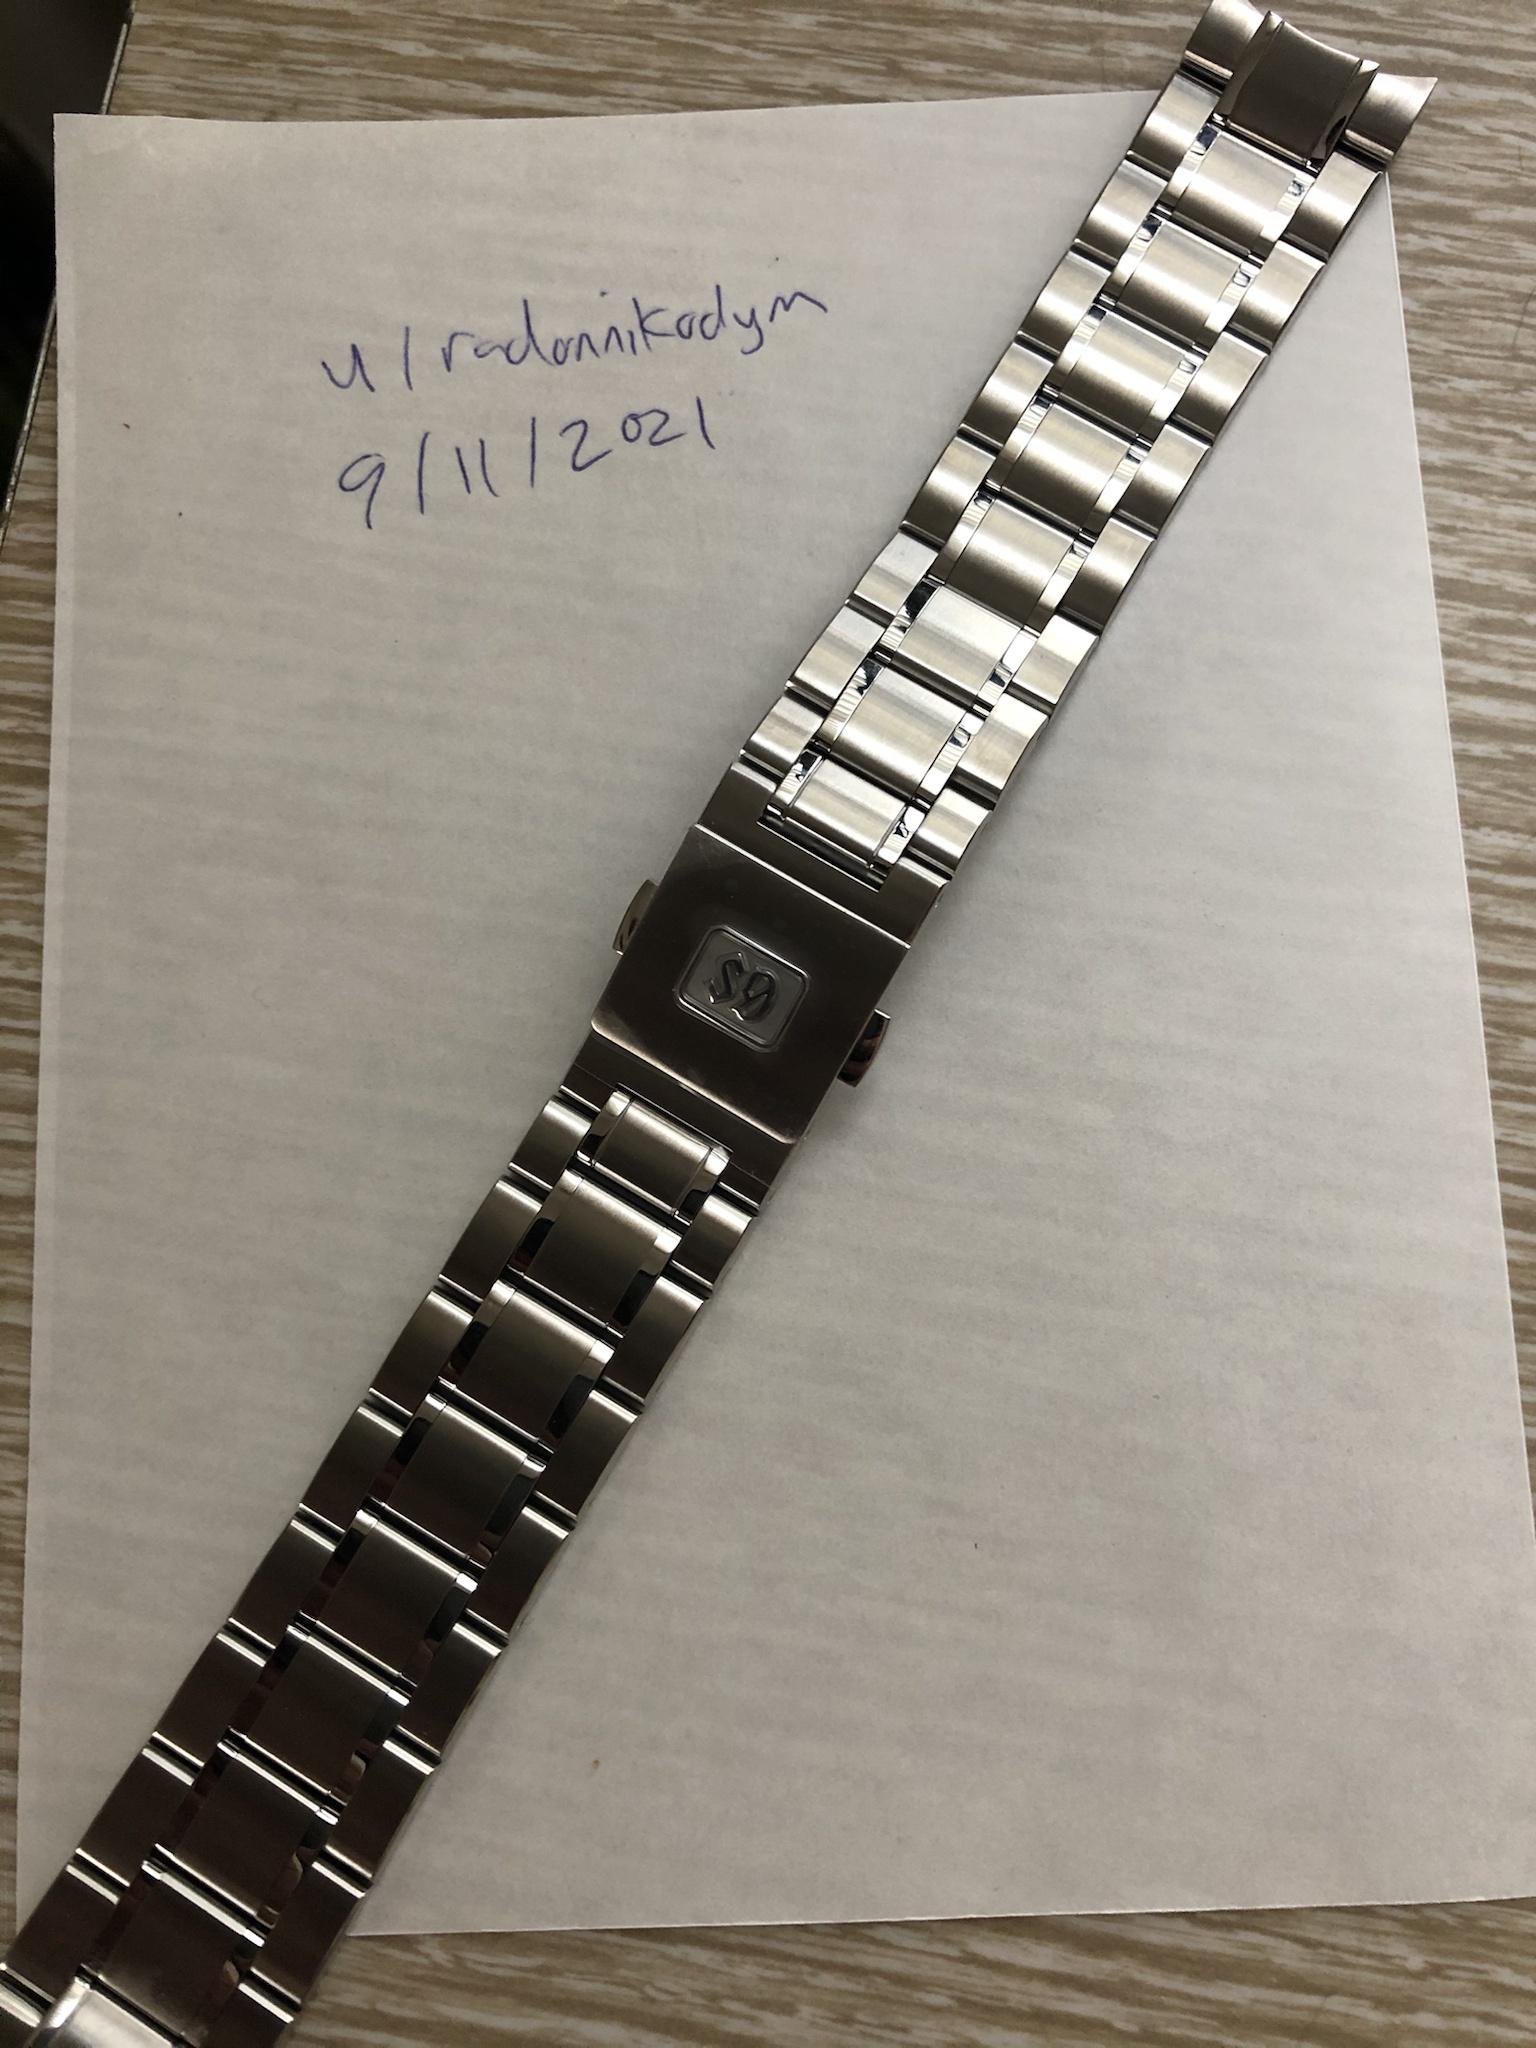 WTS] Grand Seiko steel bracelet for SBGR261, SBGW231, SBGM221, and others,  new | WatchCharts